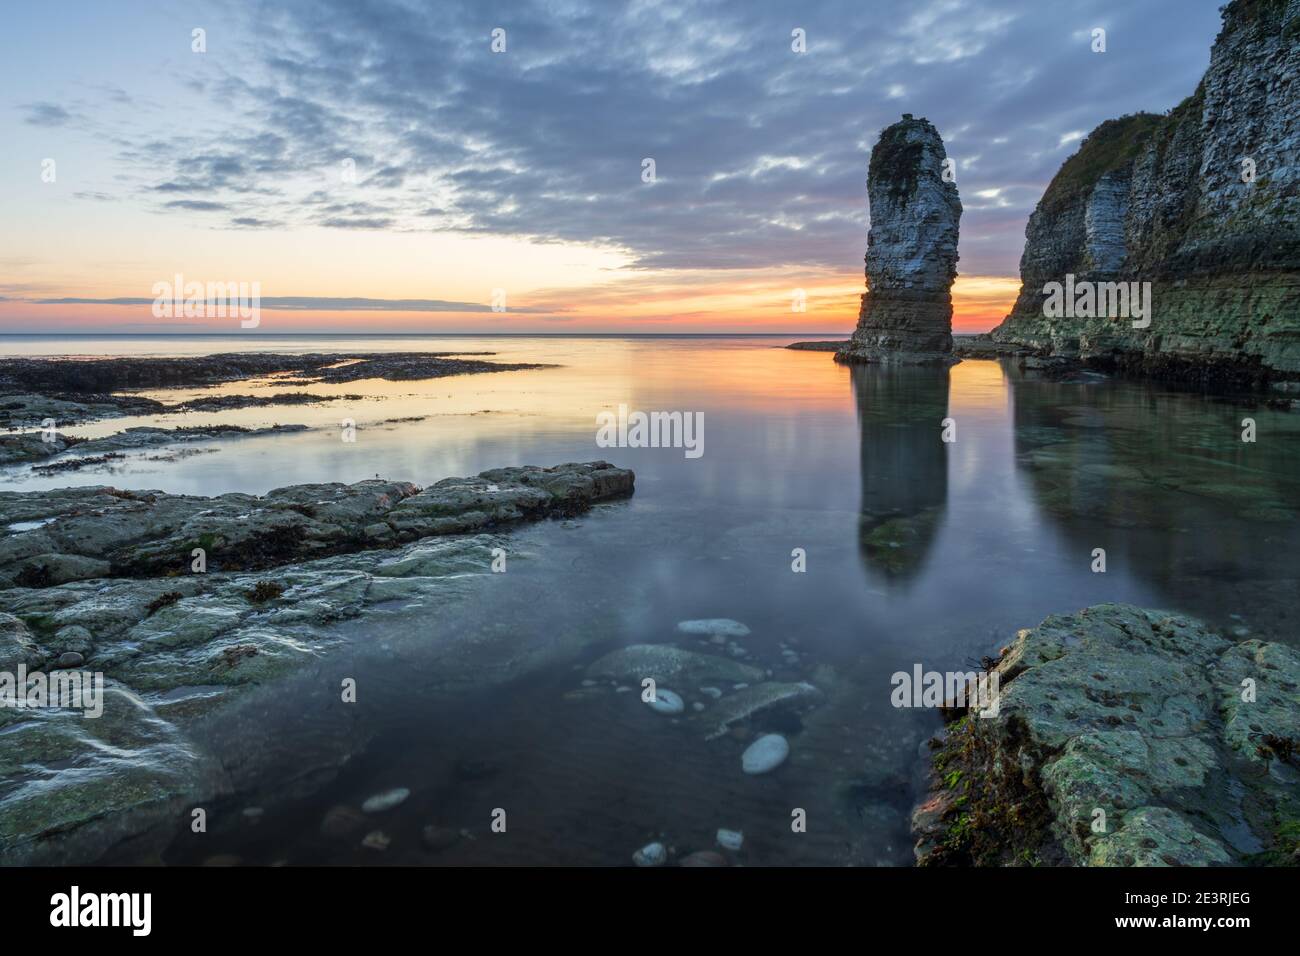 The first glow of sunrise highlights the bank of cloud behind the prominent sea stack at Selwicks Bay on the Yorkshire coast. Stock Photo